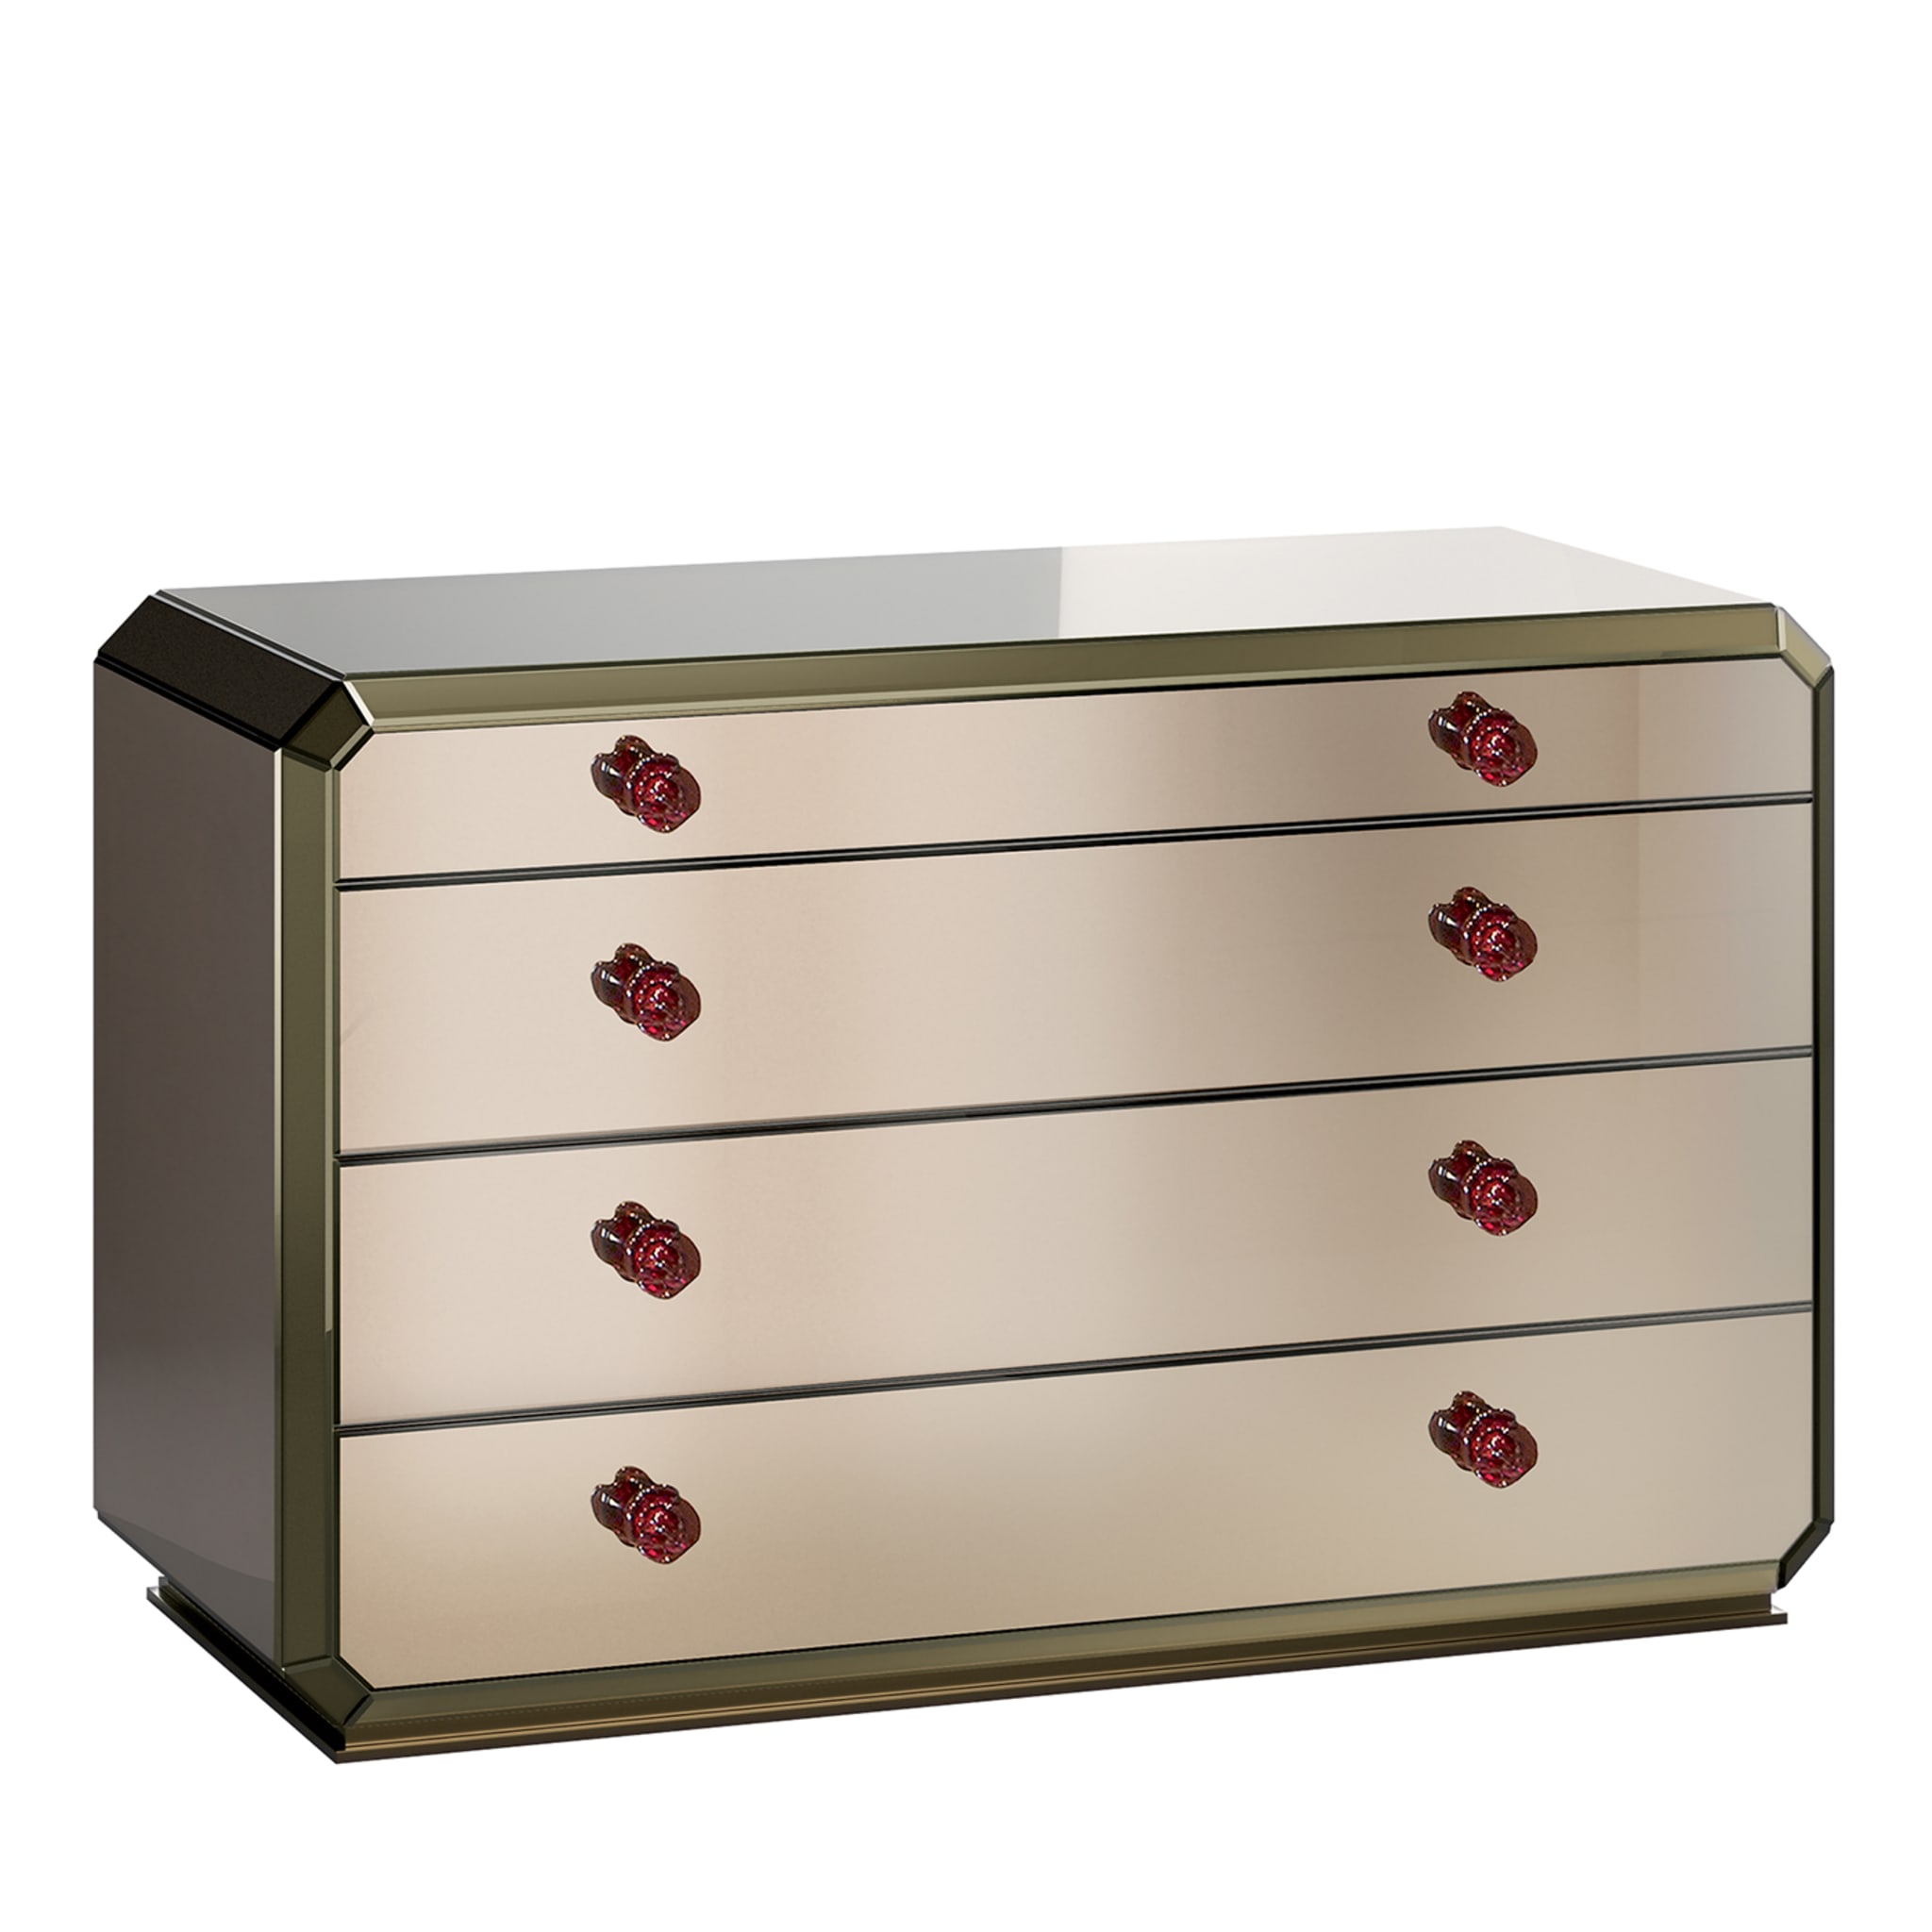 Rialto Chest of Drawers - Main view